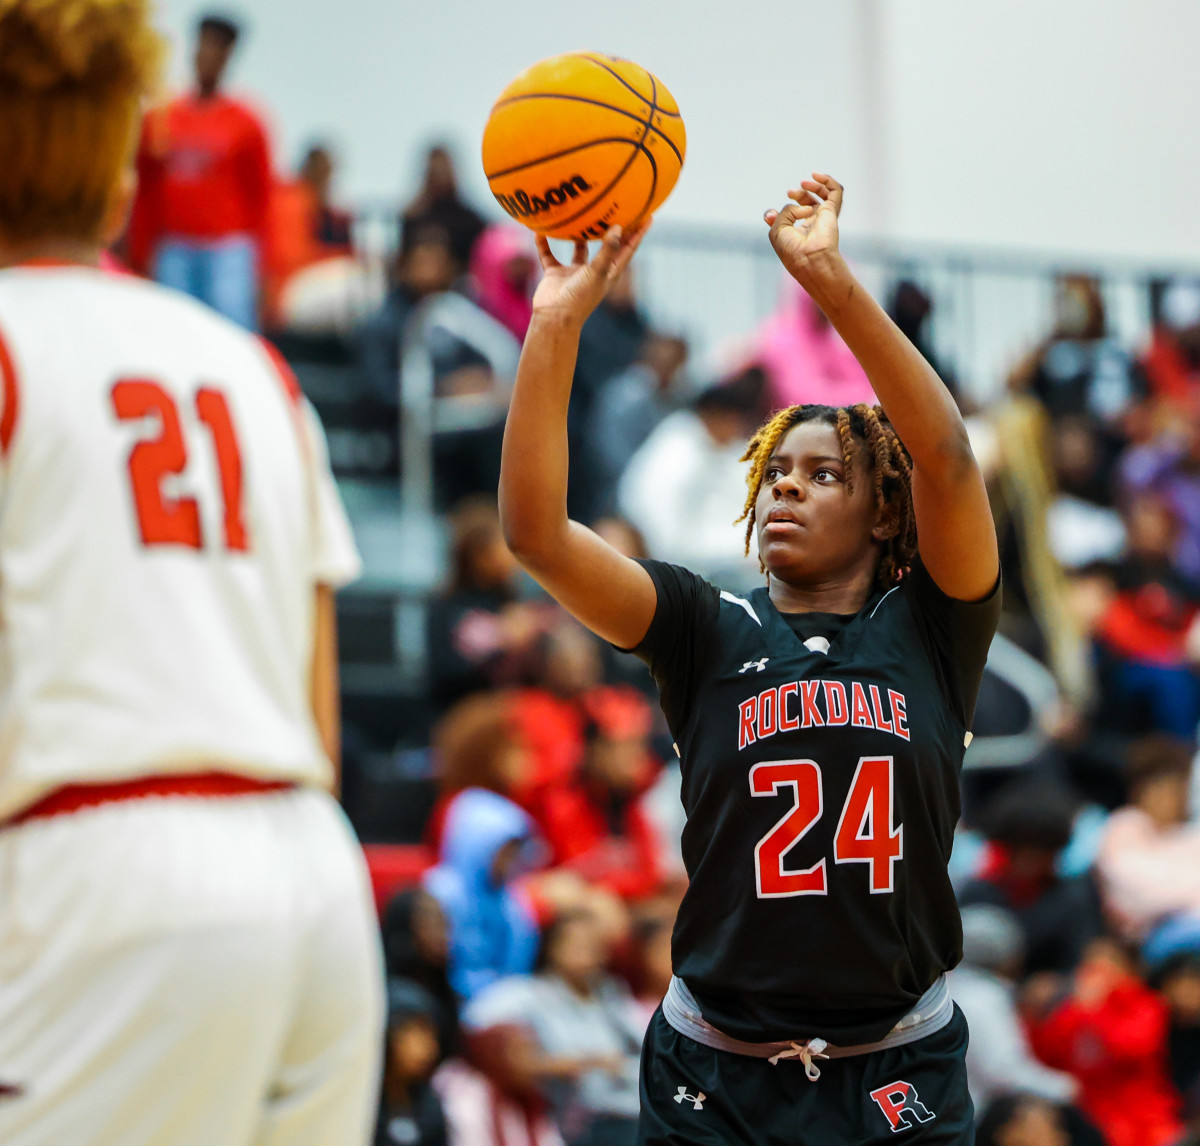 Rockdale County's Nylah Williams converted a pair of 3-point plays and scored seven points in the fourth quarter to spark the Bulldogs comeback. She finished with 12 points in the contest.